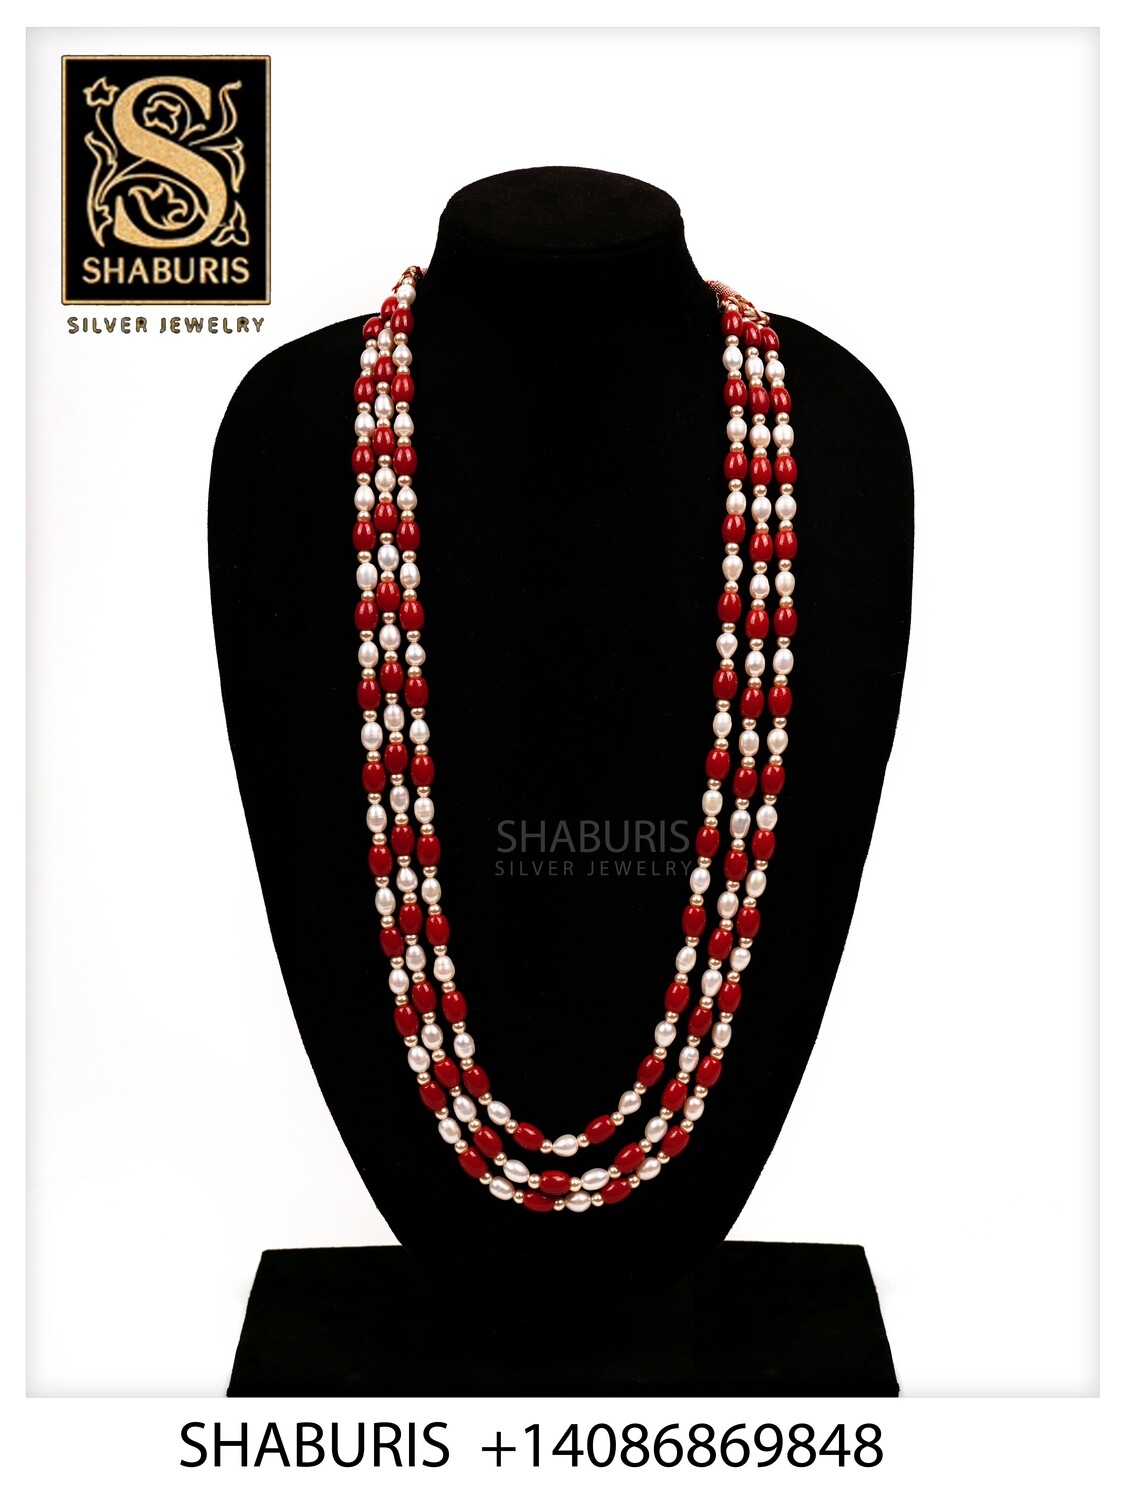 Natural Coral & South Sea Pearl Necklace